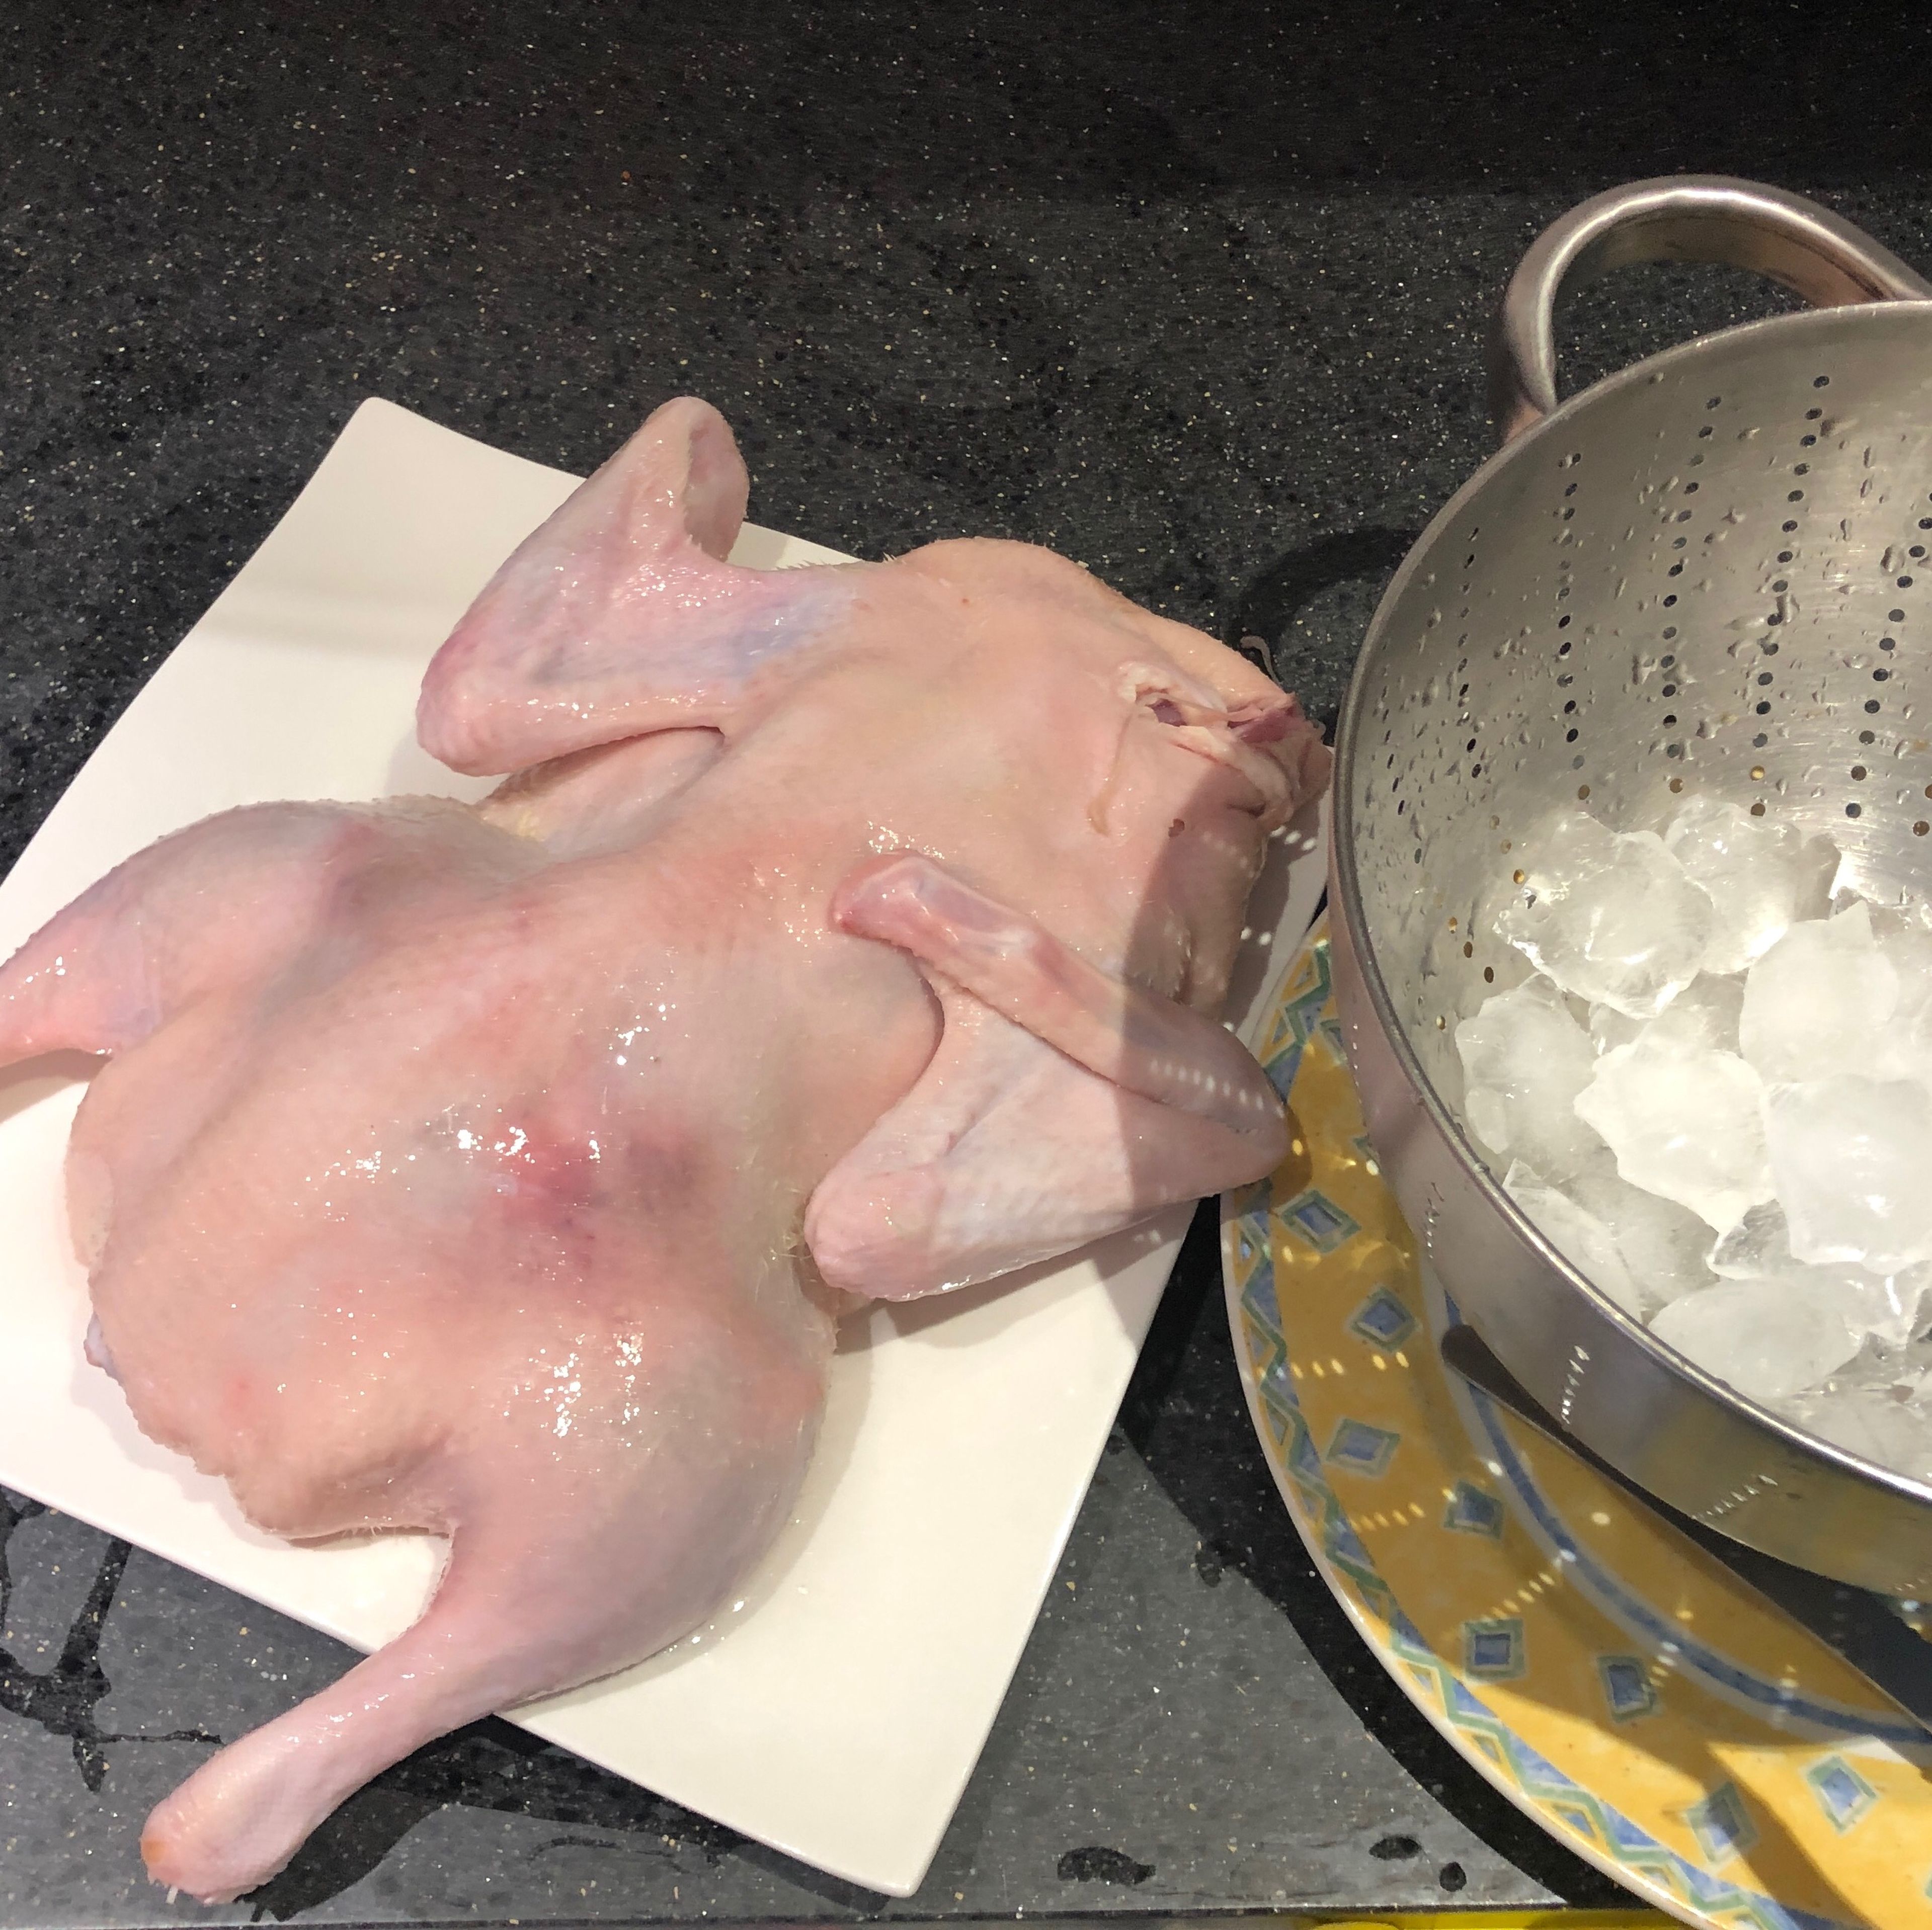 Clean the whole duck, and at the same time boil 1L water to rinse the skin of the duck twice, the put into ice cubes